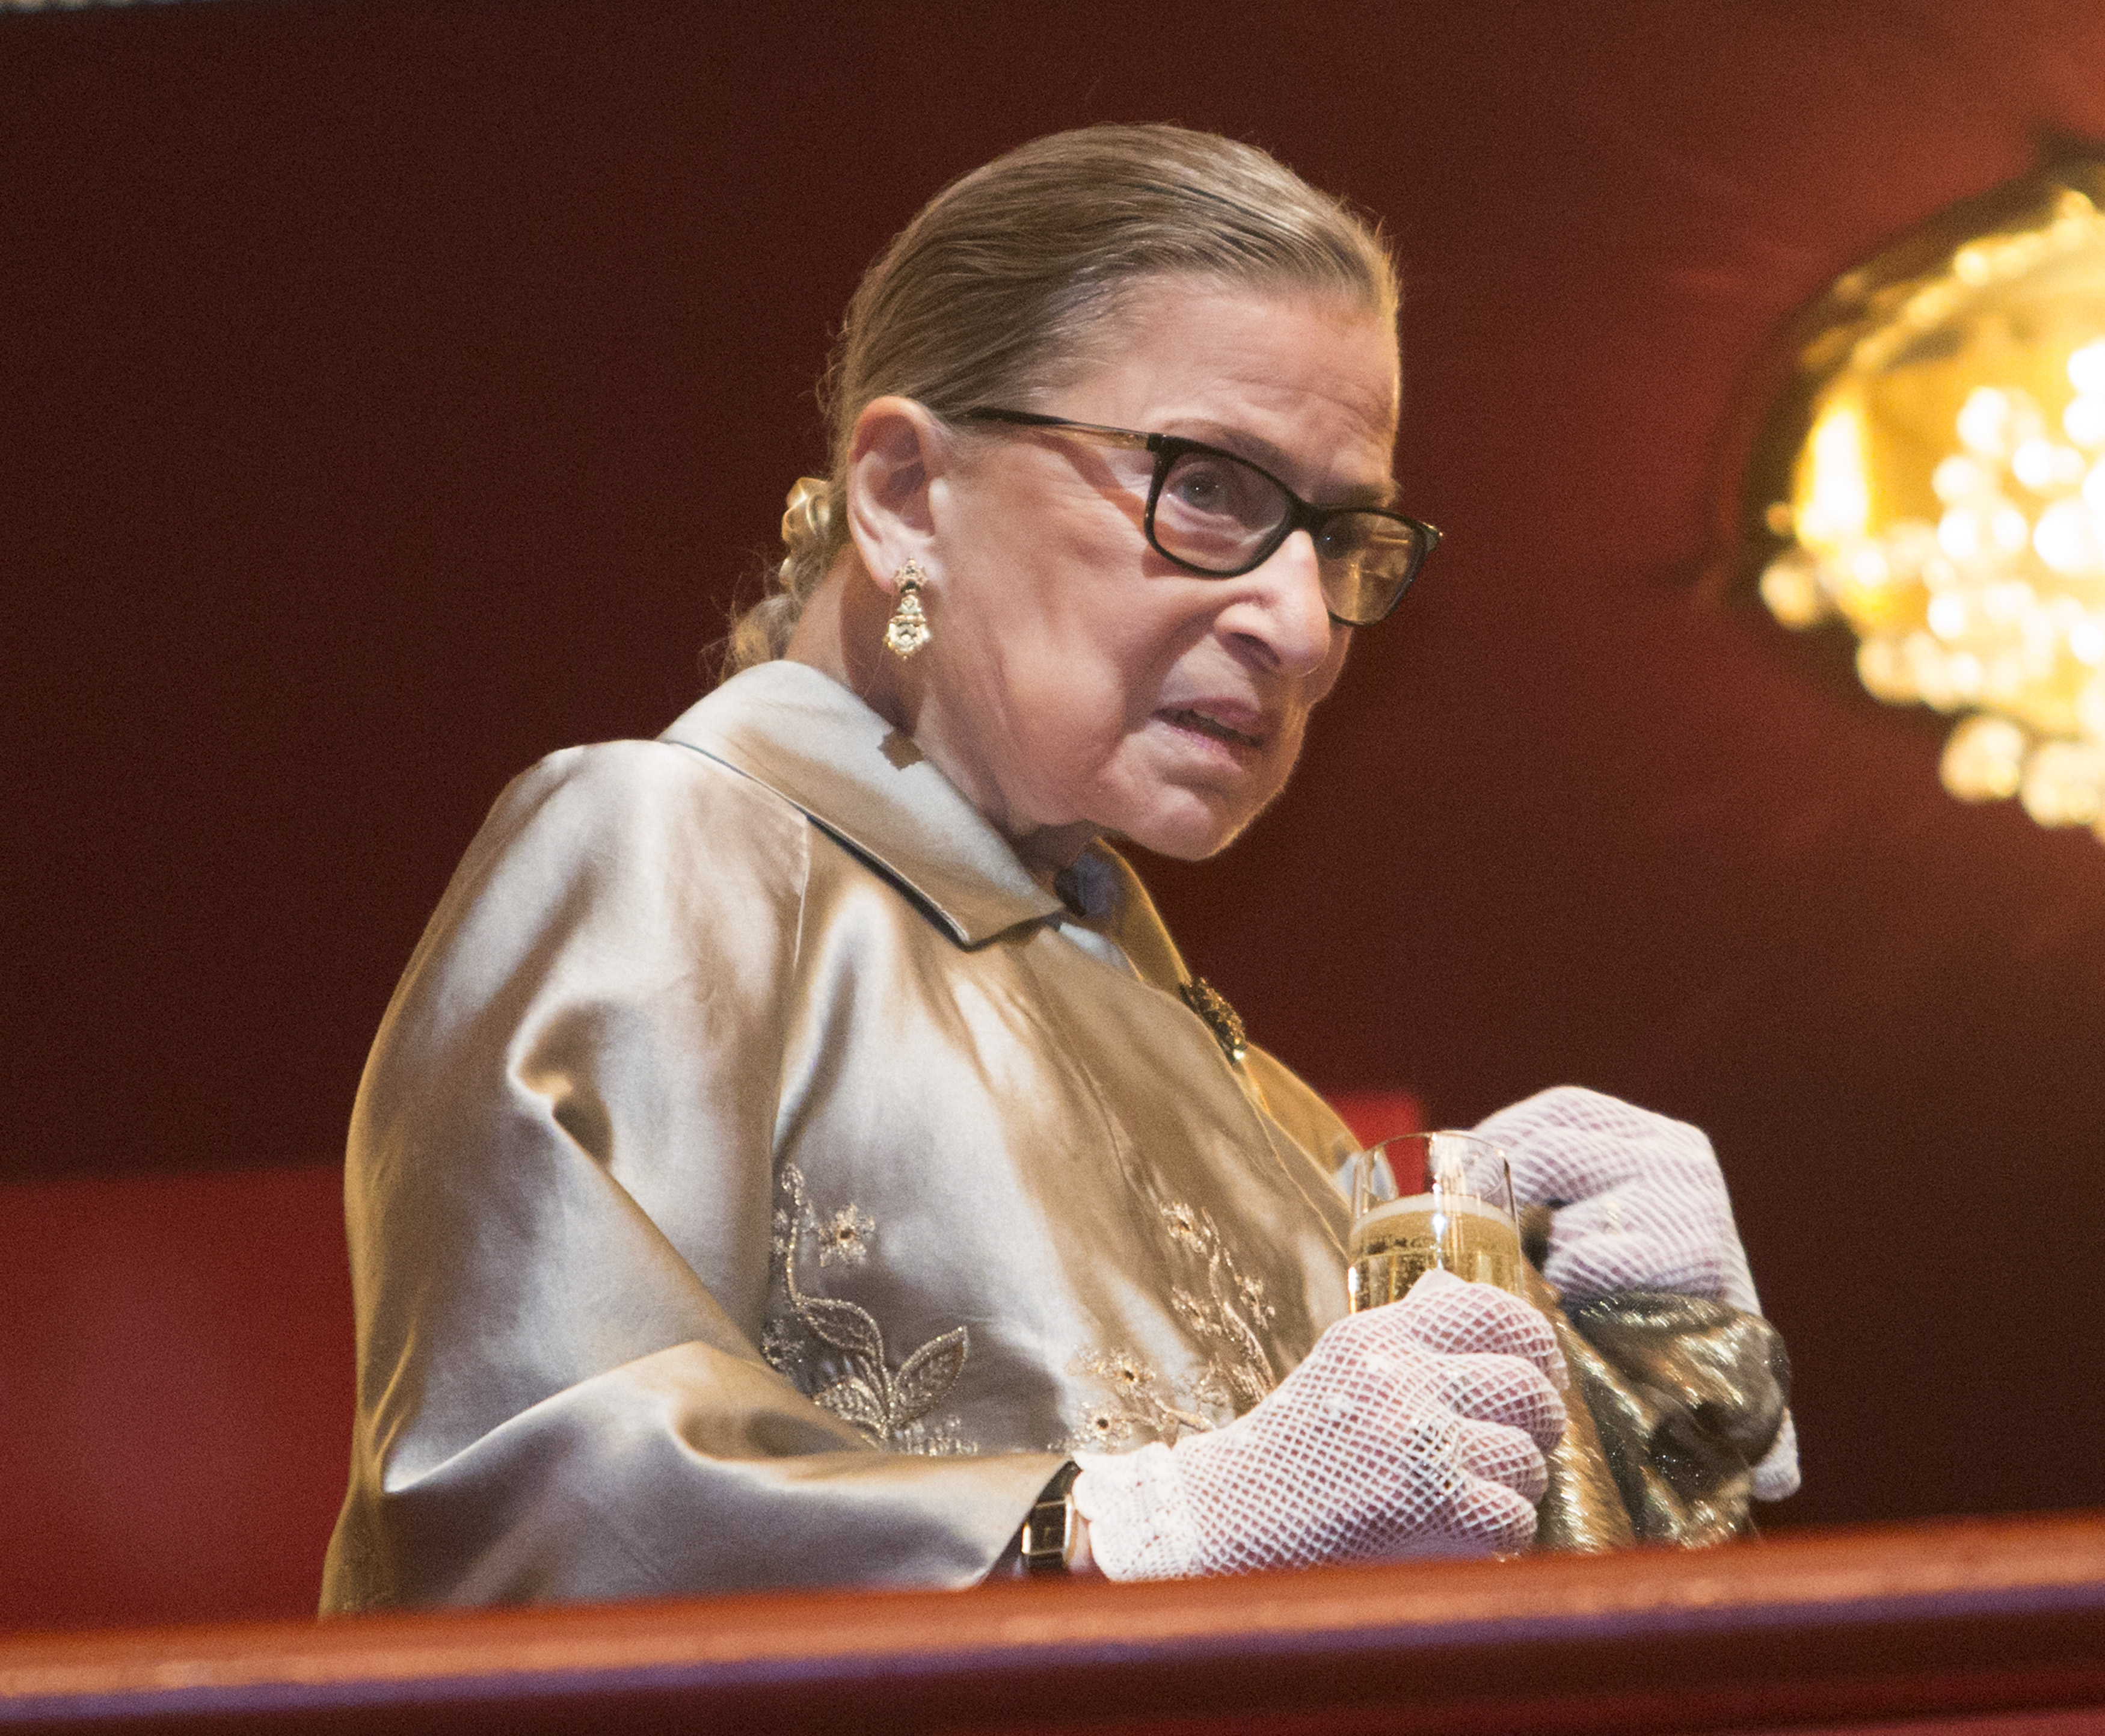 Supreme Court Justice Ruth Bader Ginsburg at the Kennedy Center Honors in Washington, D.C., on Dec. 6, 2015 (Chris Kleponis—AFP/Getty Images)